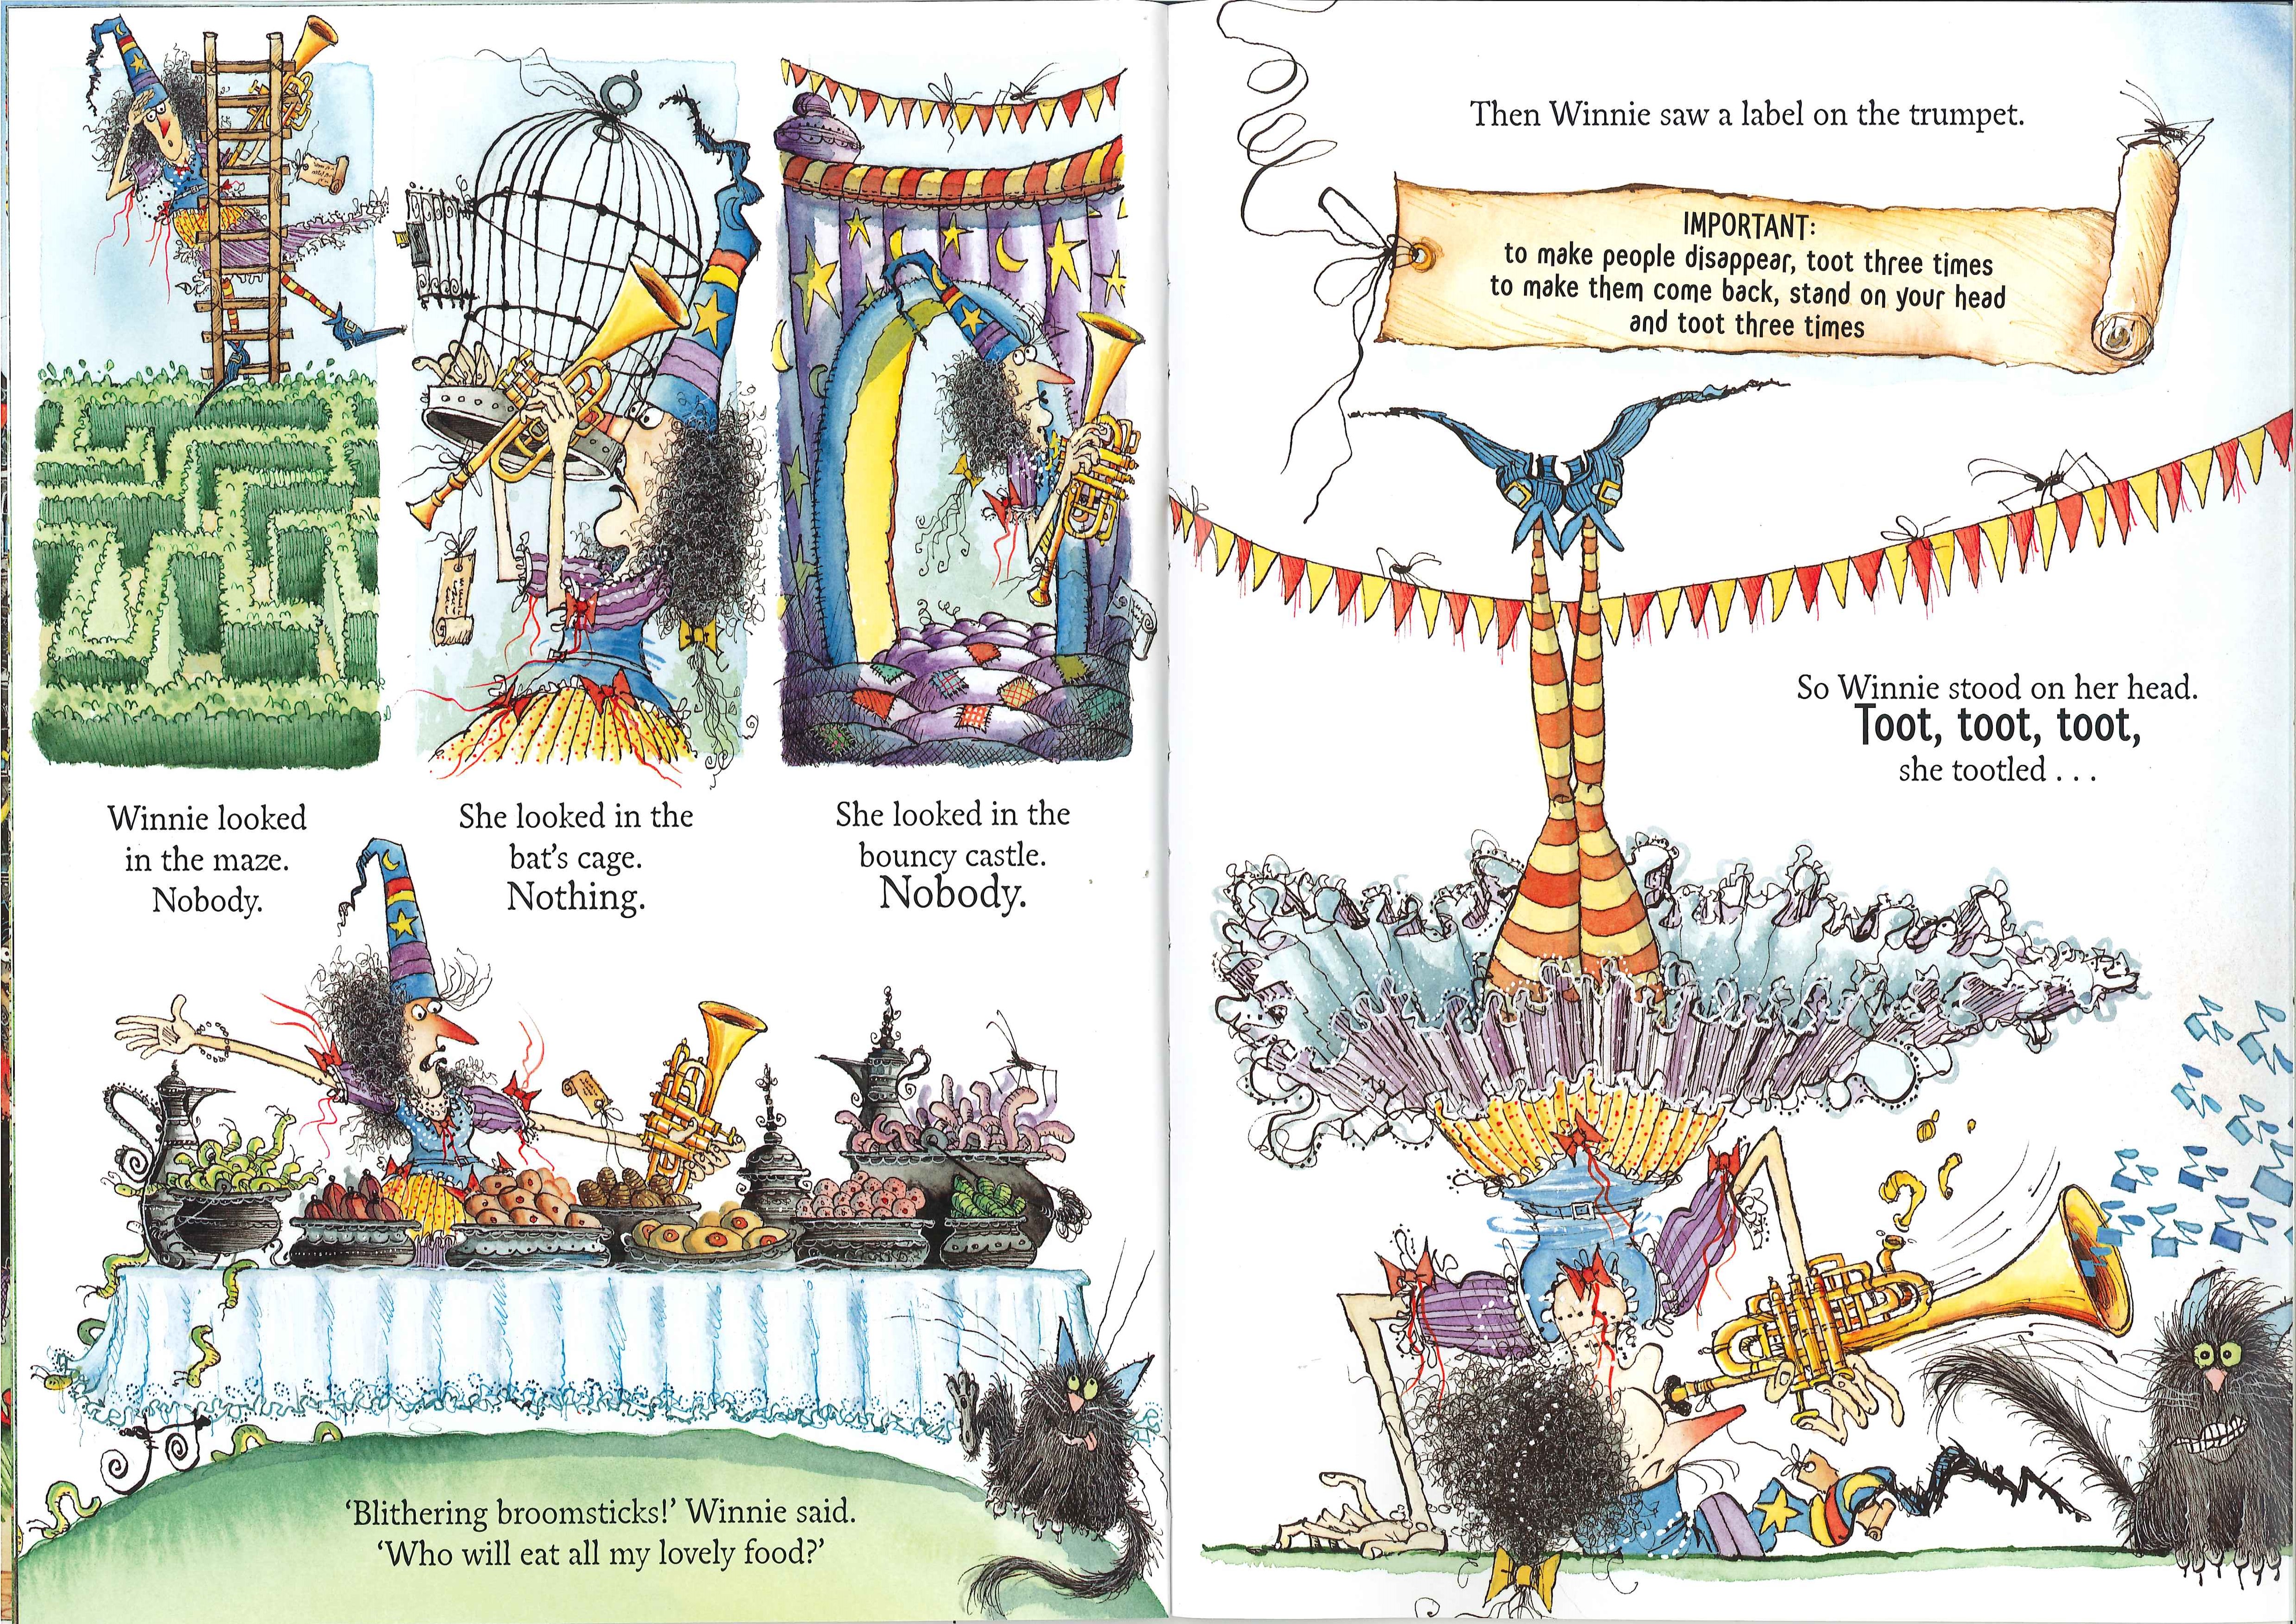 Winnie and Wilbur: the Celebration Collection